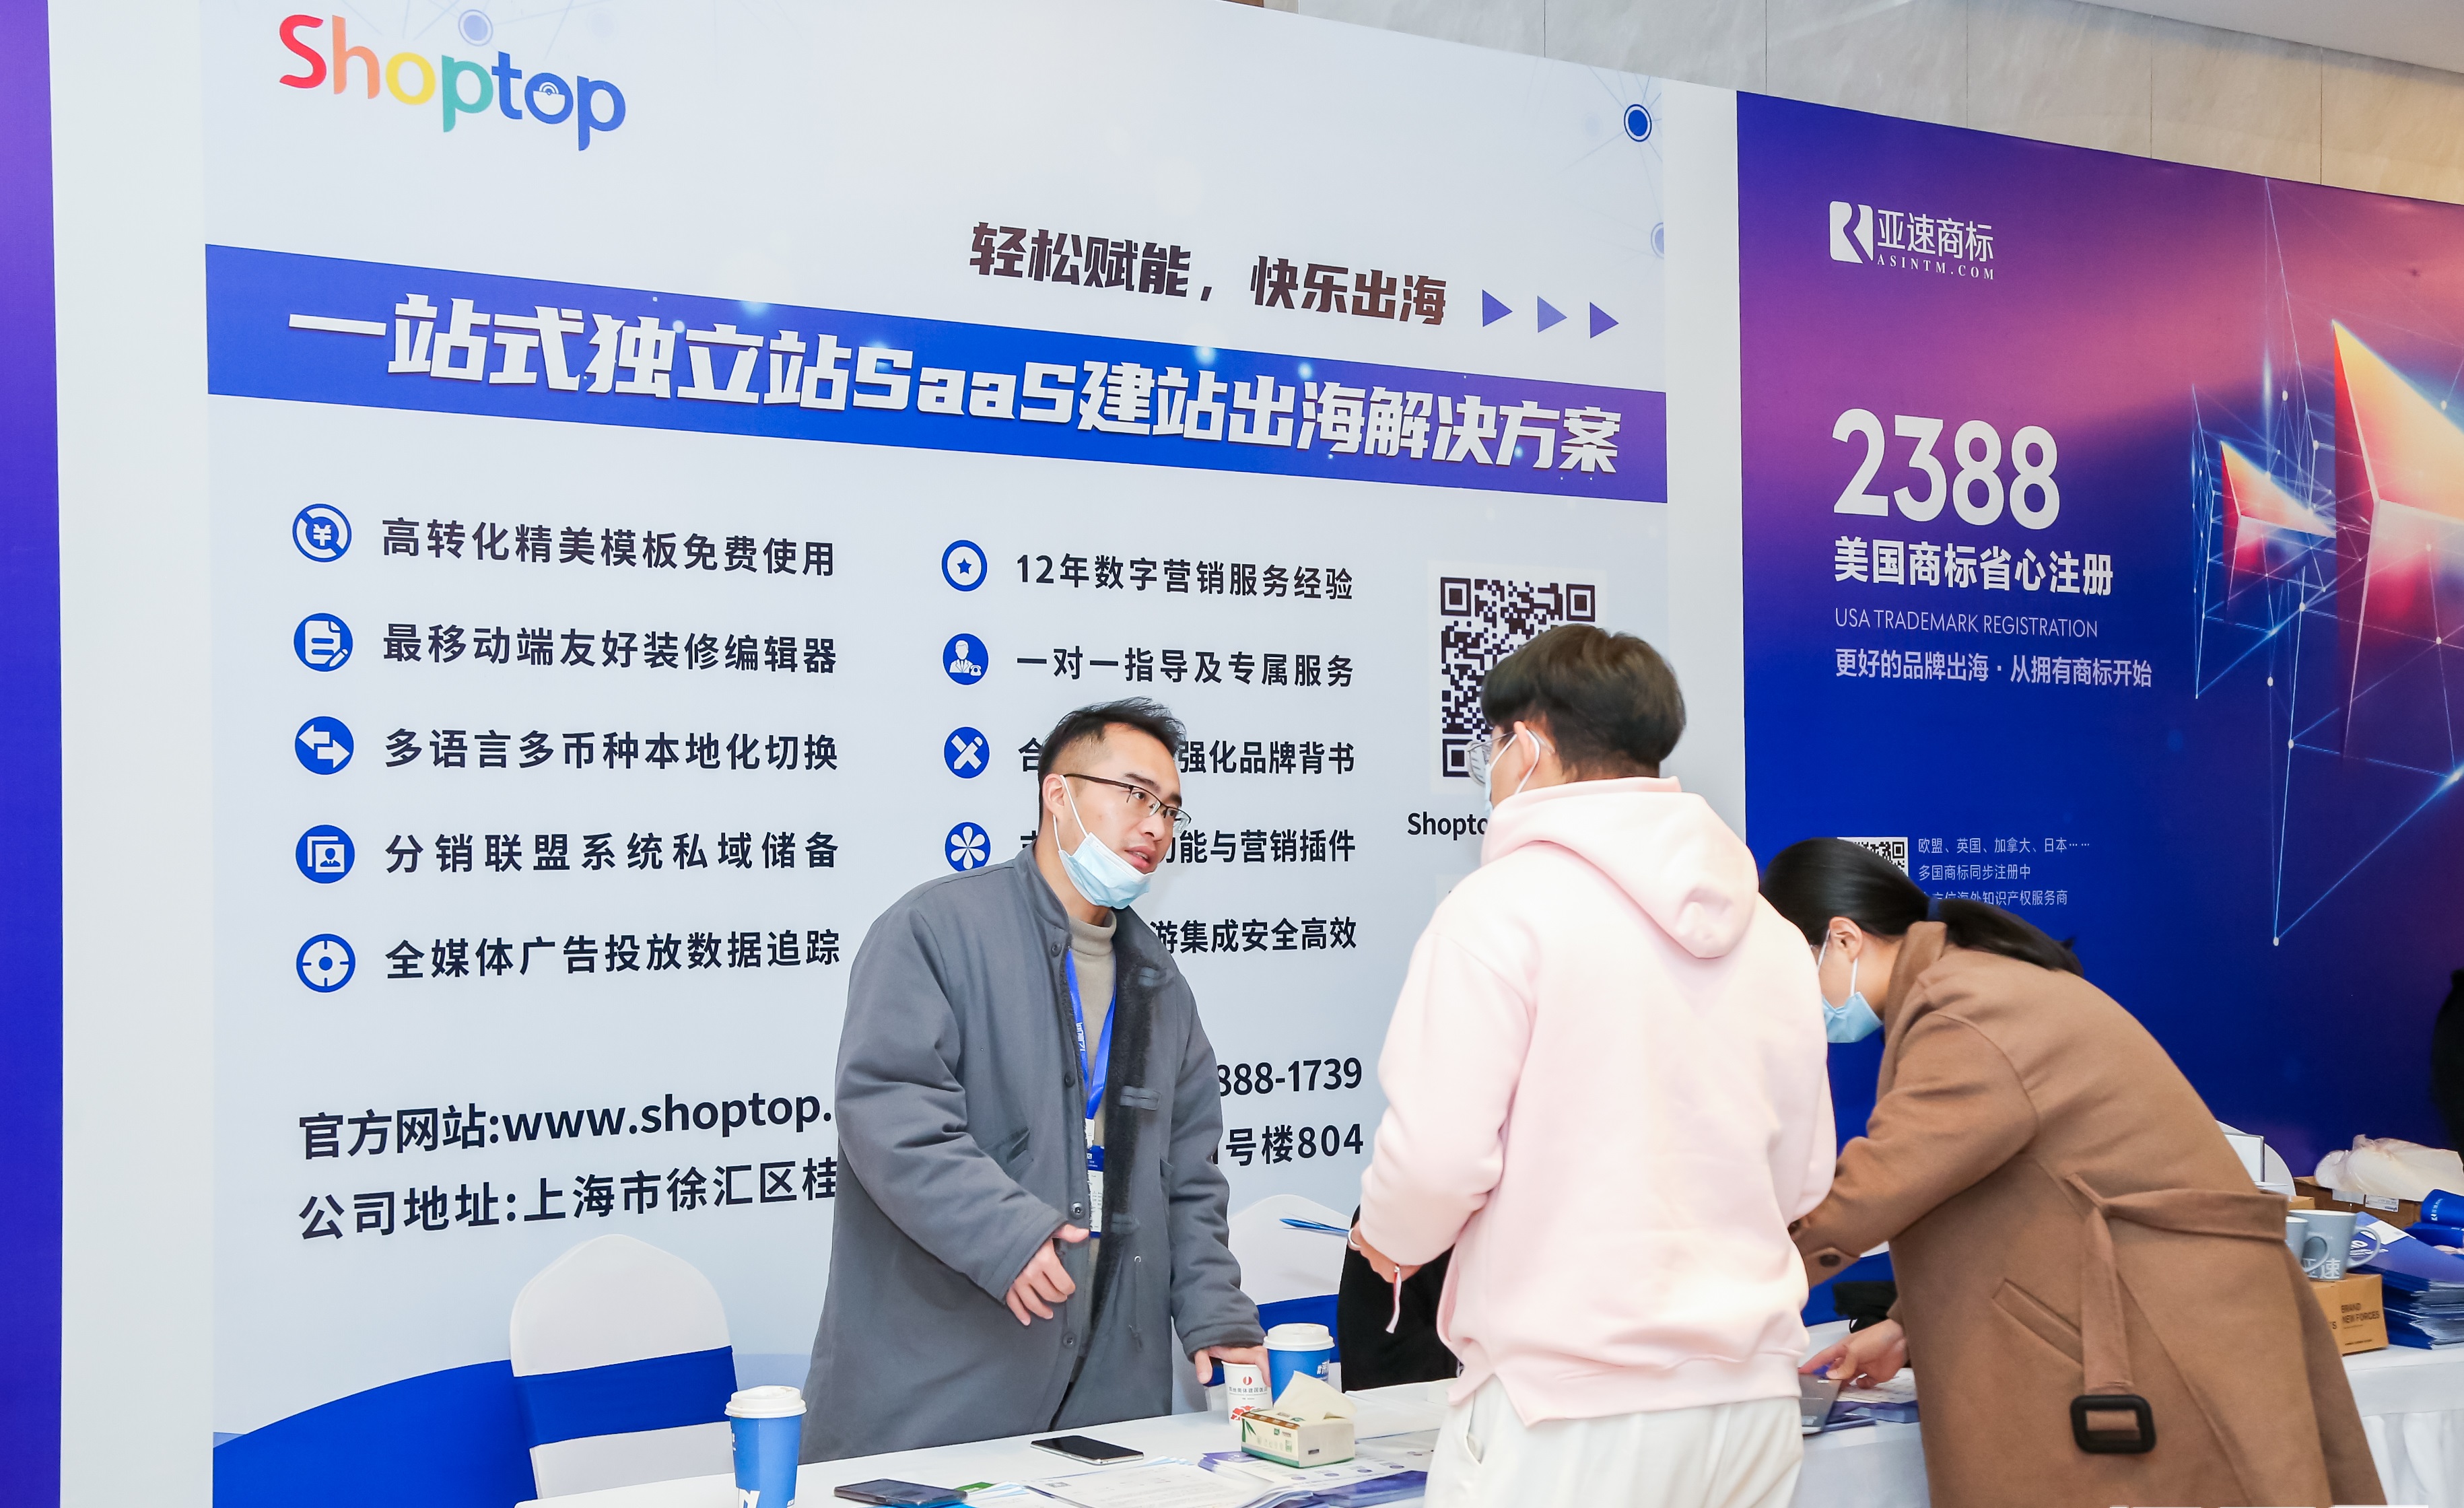 Shoptop, an e-commerce platform, made a wonderful appearance at the 2021 First Mid China Cross border E-commerce Seller Brand Summit